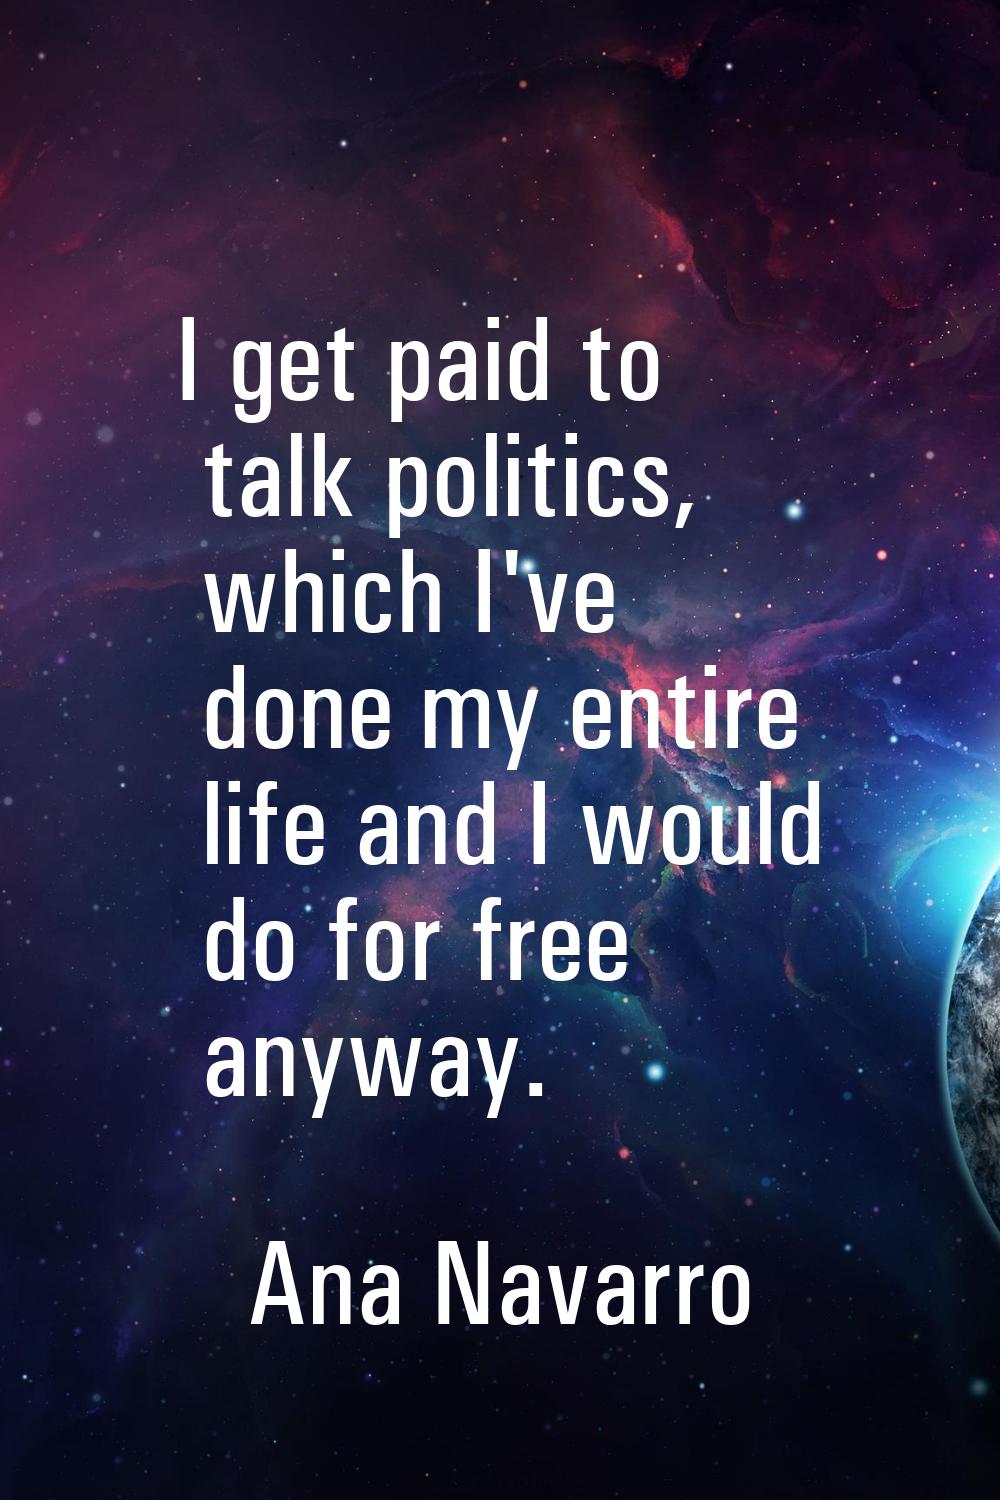 I get paid to talk politics, which I've done my entire life and I would do for free anyway.